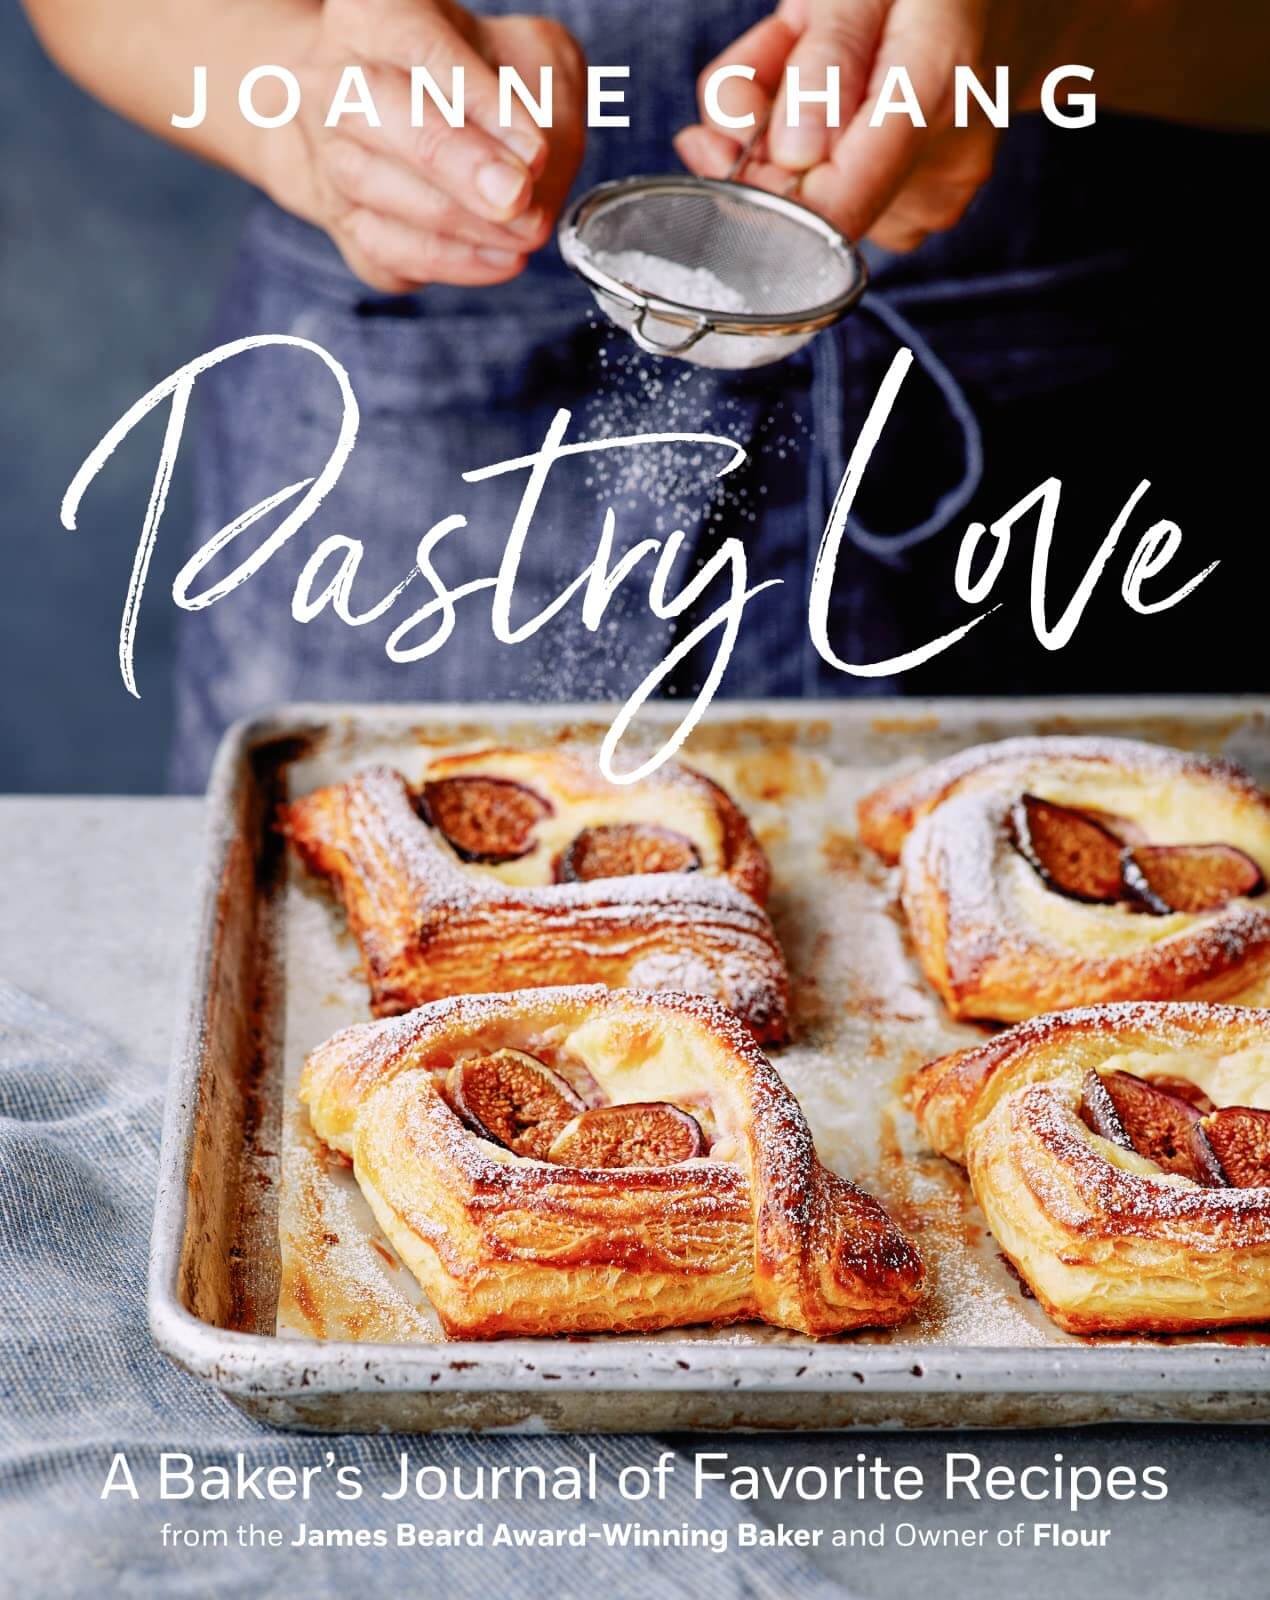 "Pastry Love" by Joanne Chang